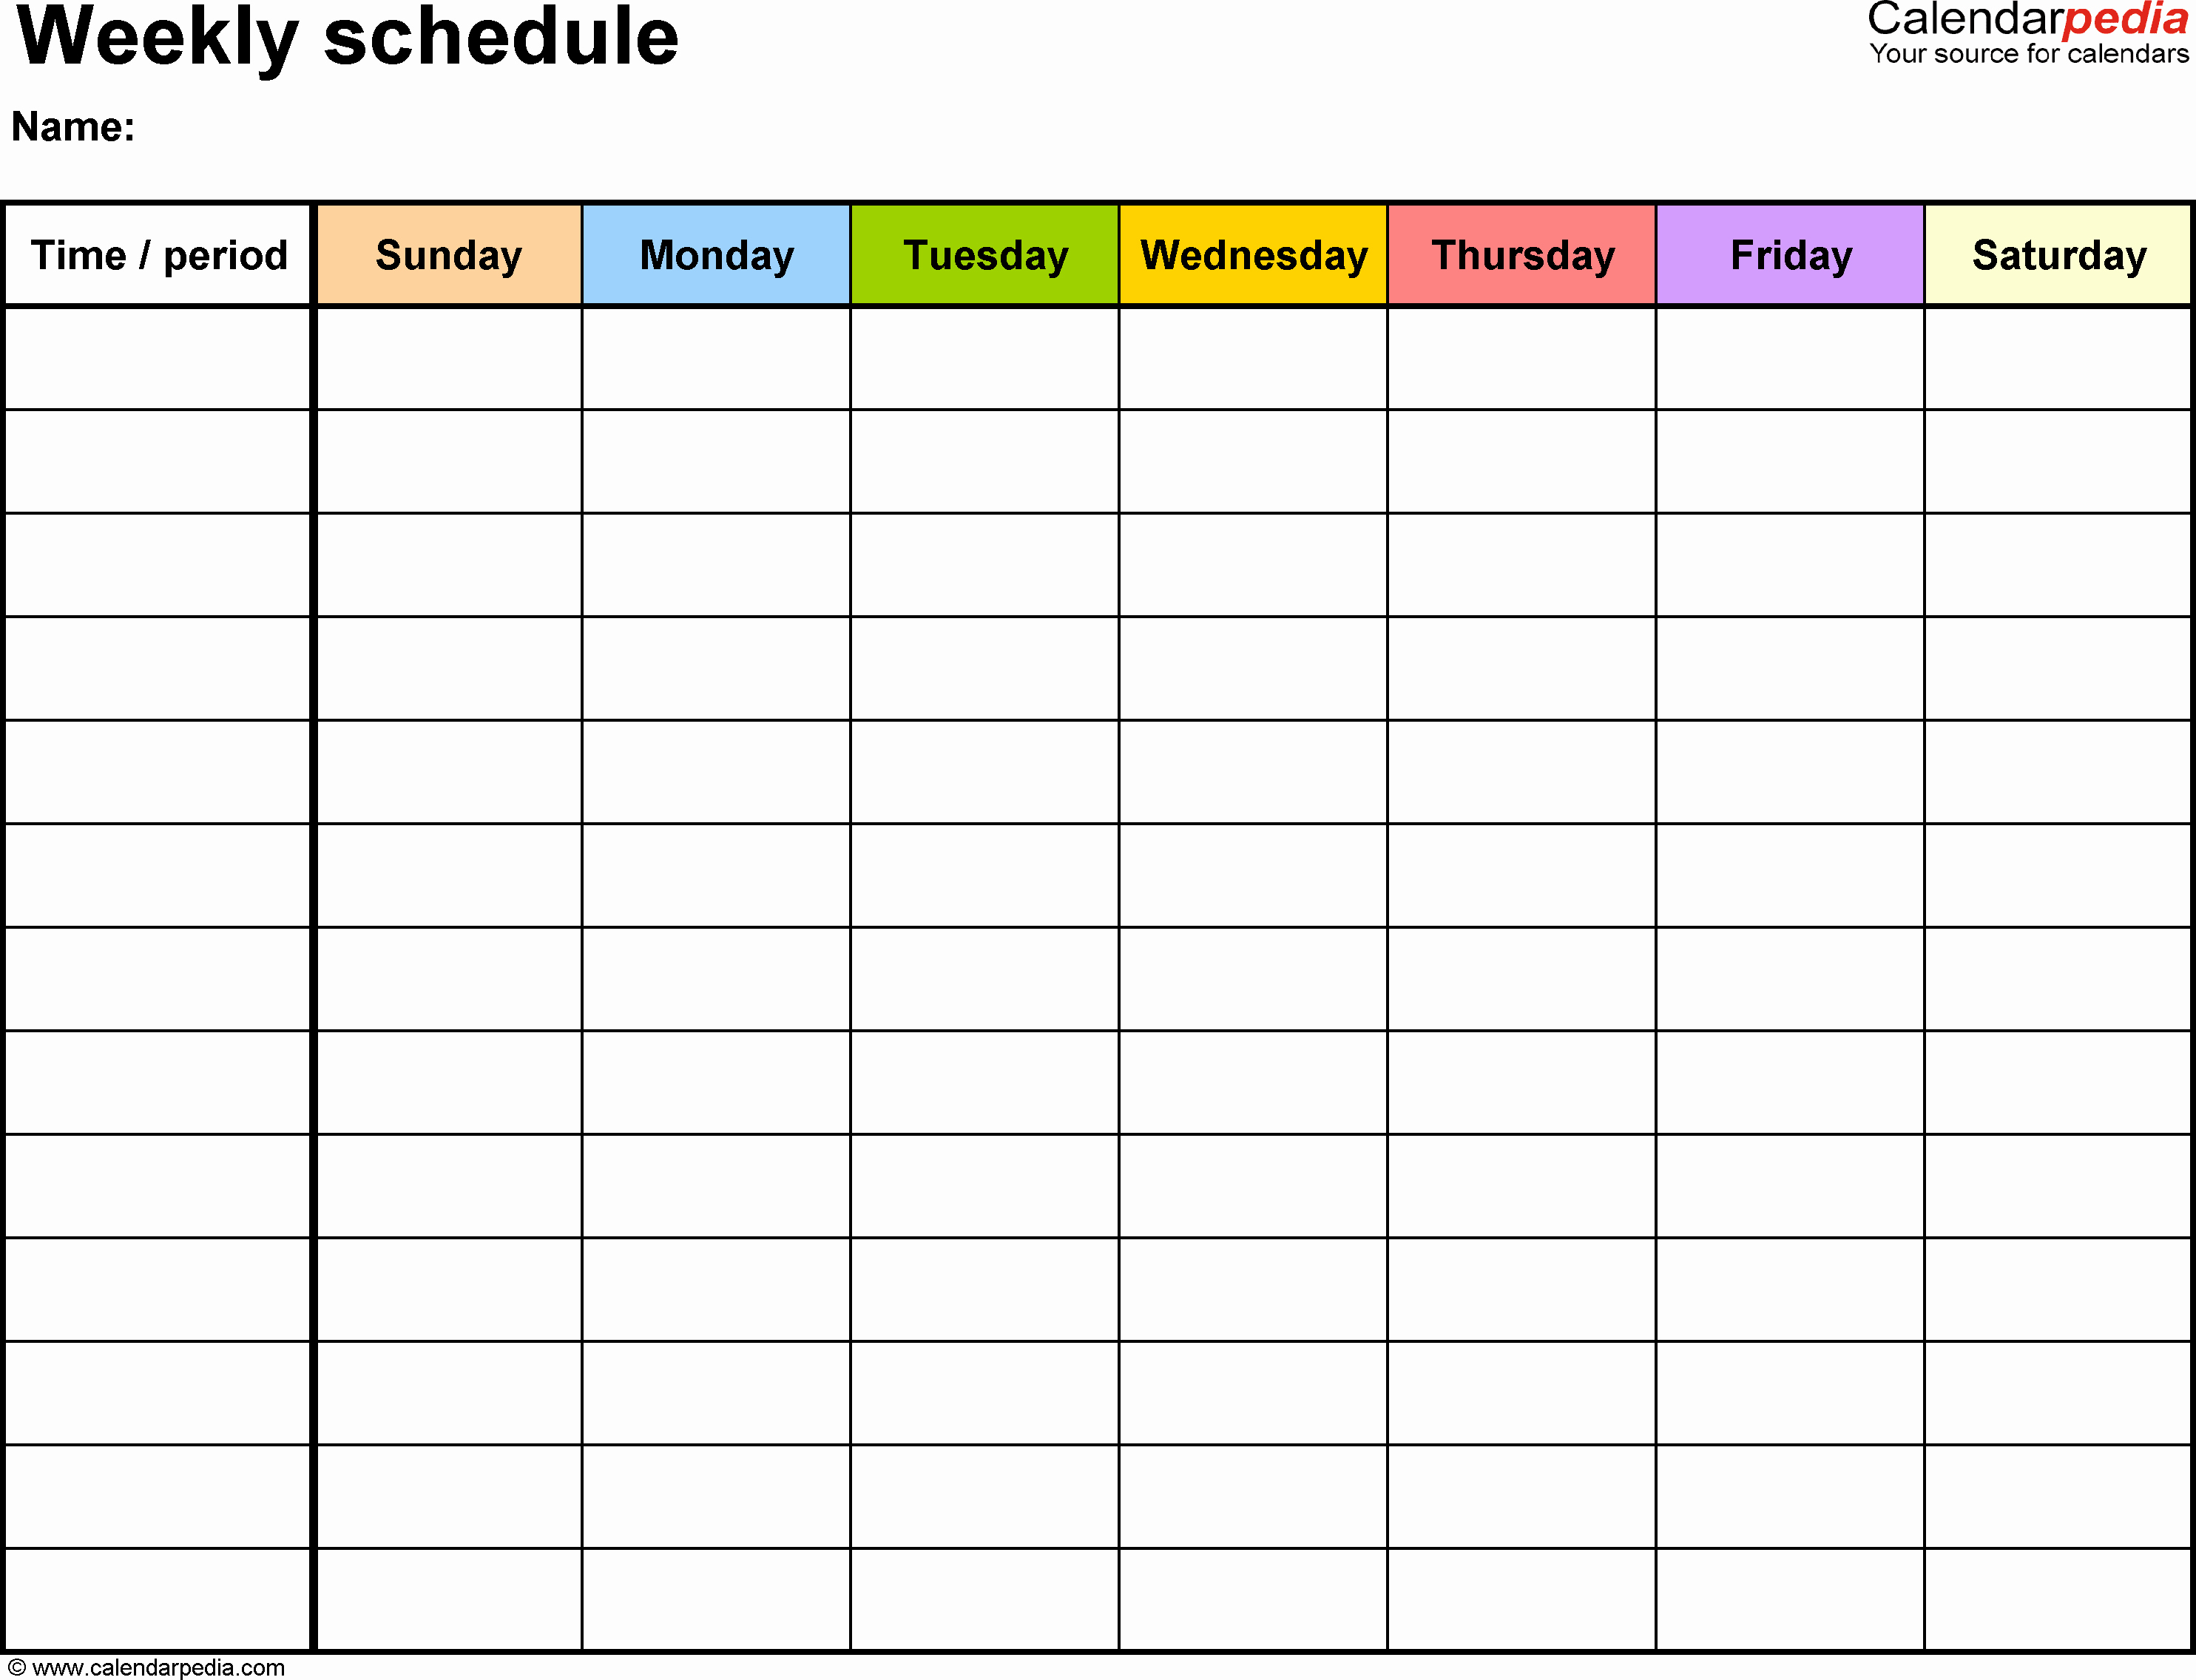 7 Day Weekly Planner Template New Weekly Schedule Template for Word Version 13 Landscape 1